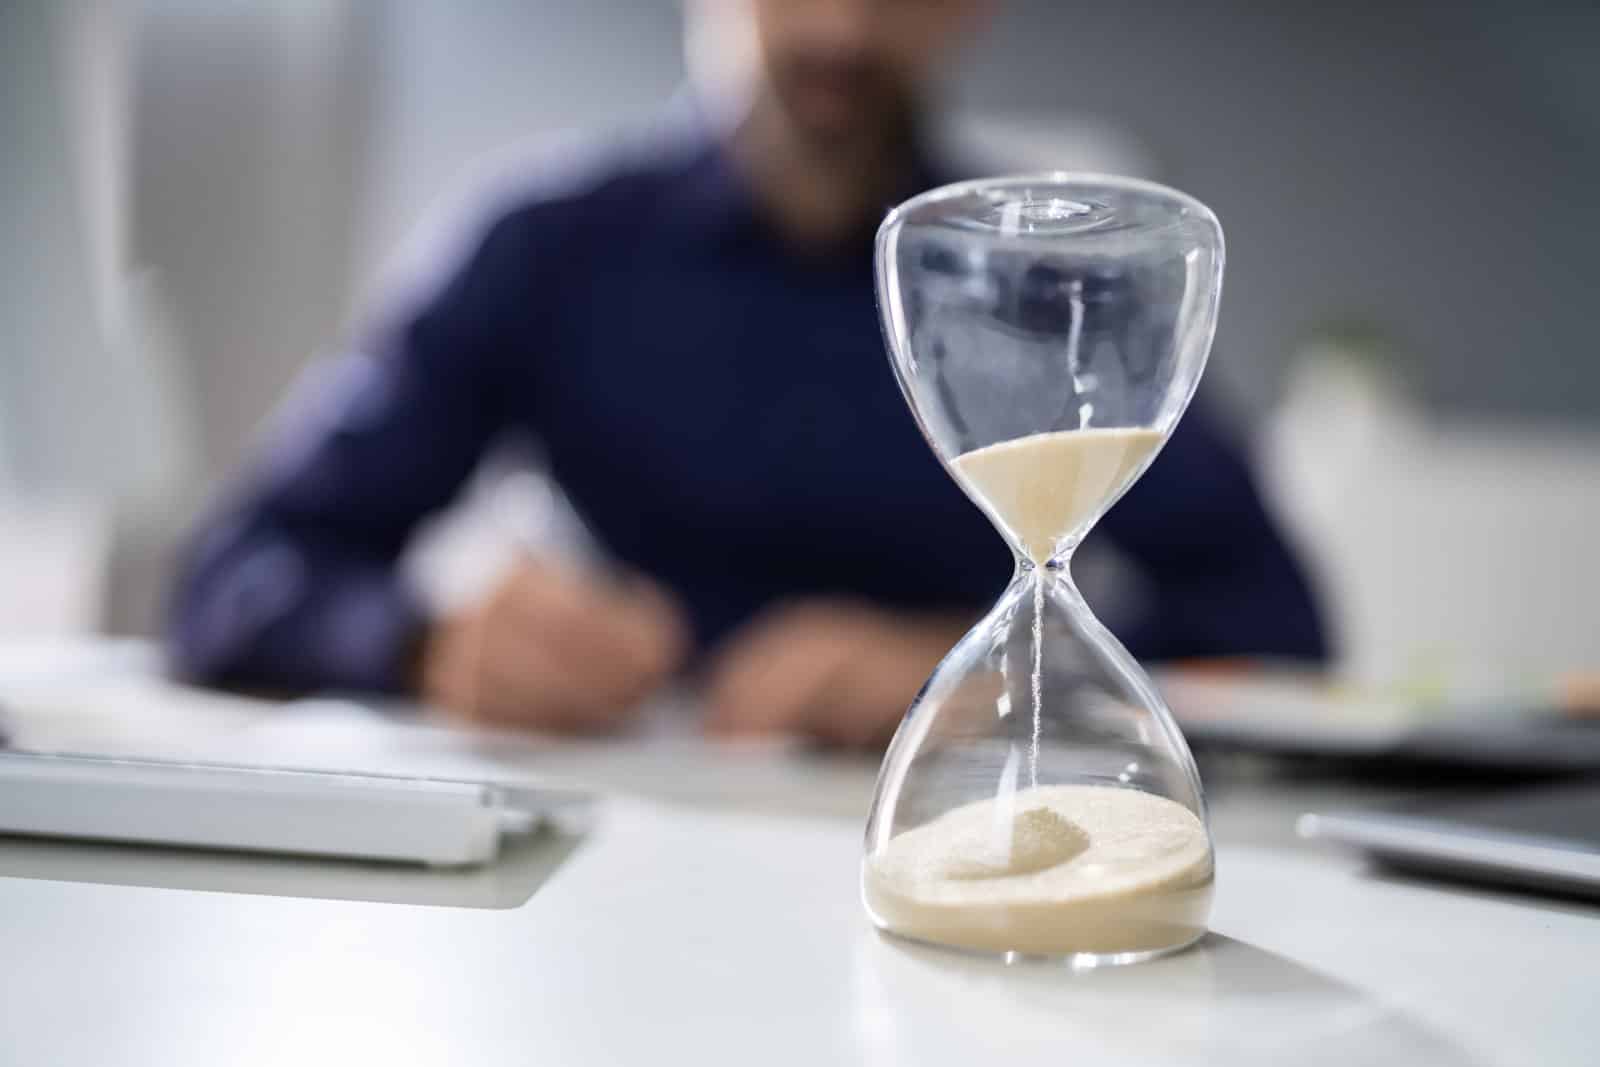 Image Credit: Shutterstock / Andrey_Popov <p>Assign realistic timeframes to each milestone. Knowing your deadlines will keep you motivated and on track.</p>